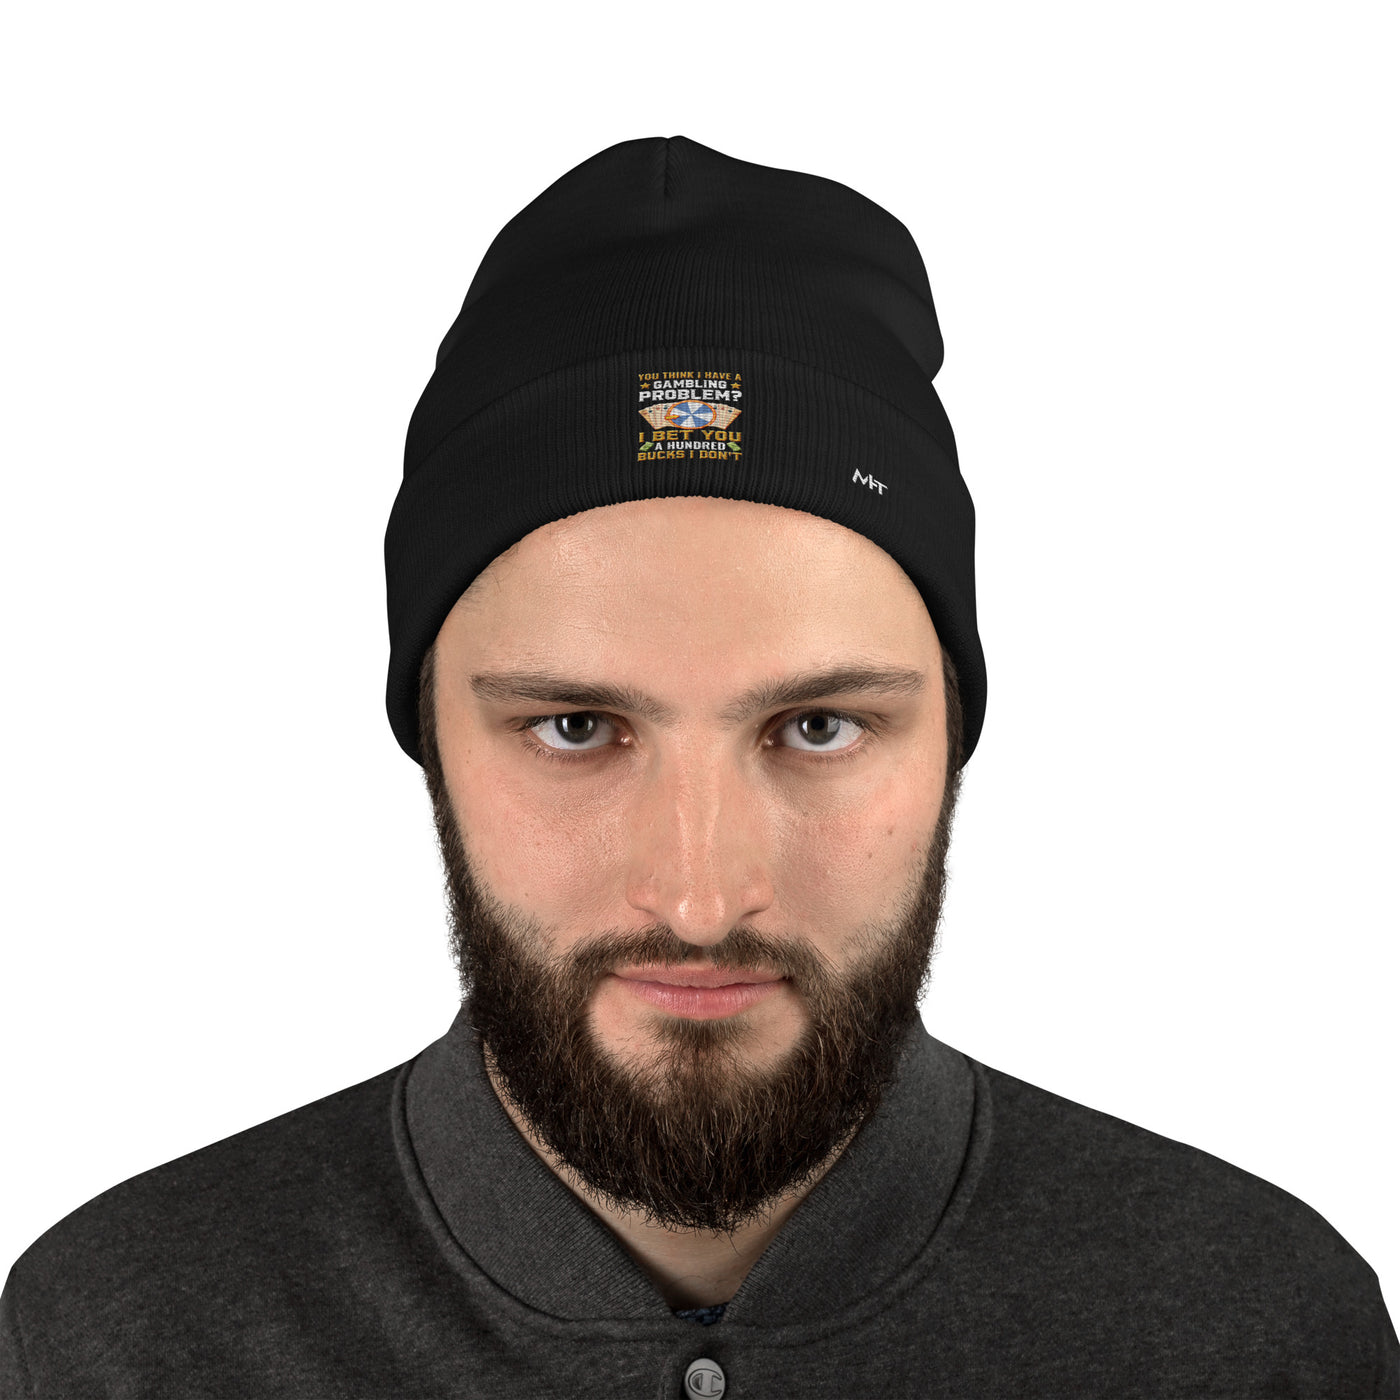 You Think I Have a Gambling Problem? I Bet you a Hundred Bucks I Don't - Embroidered Beanie